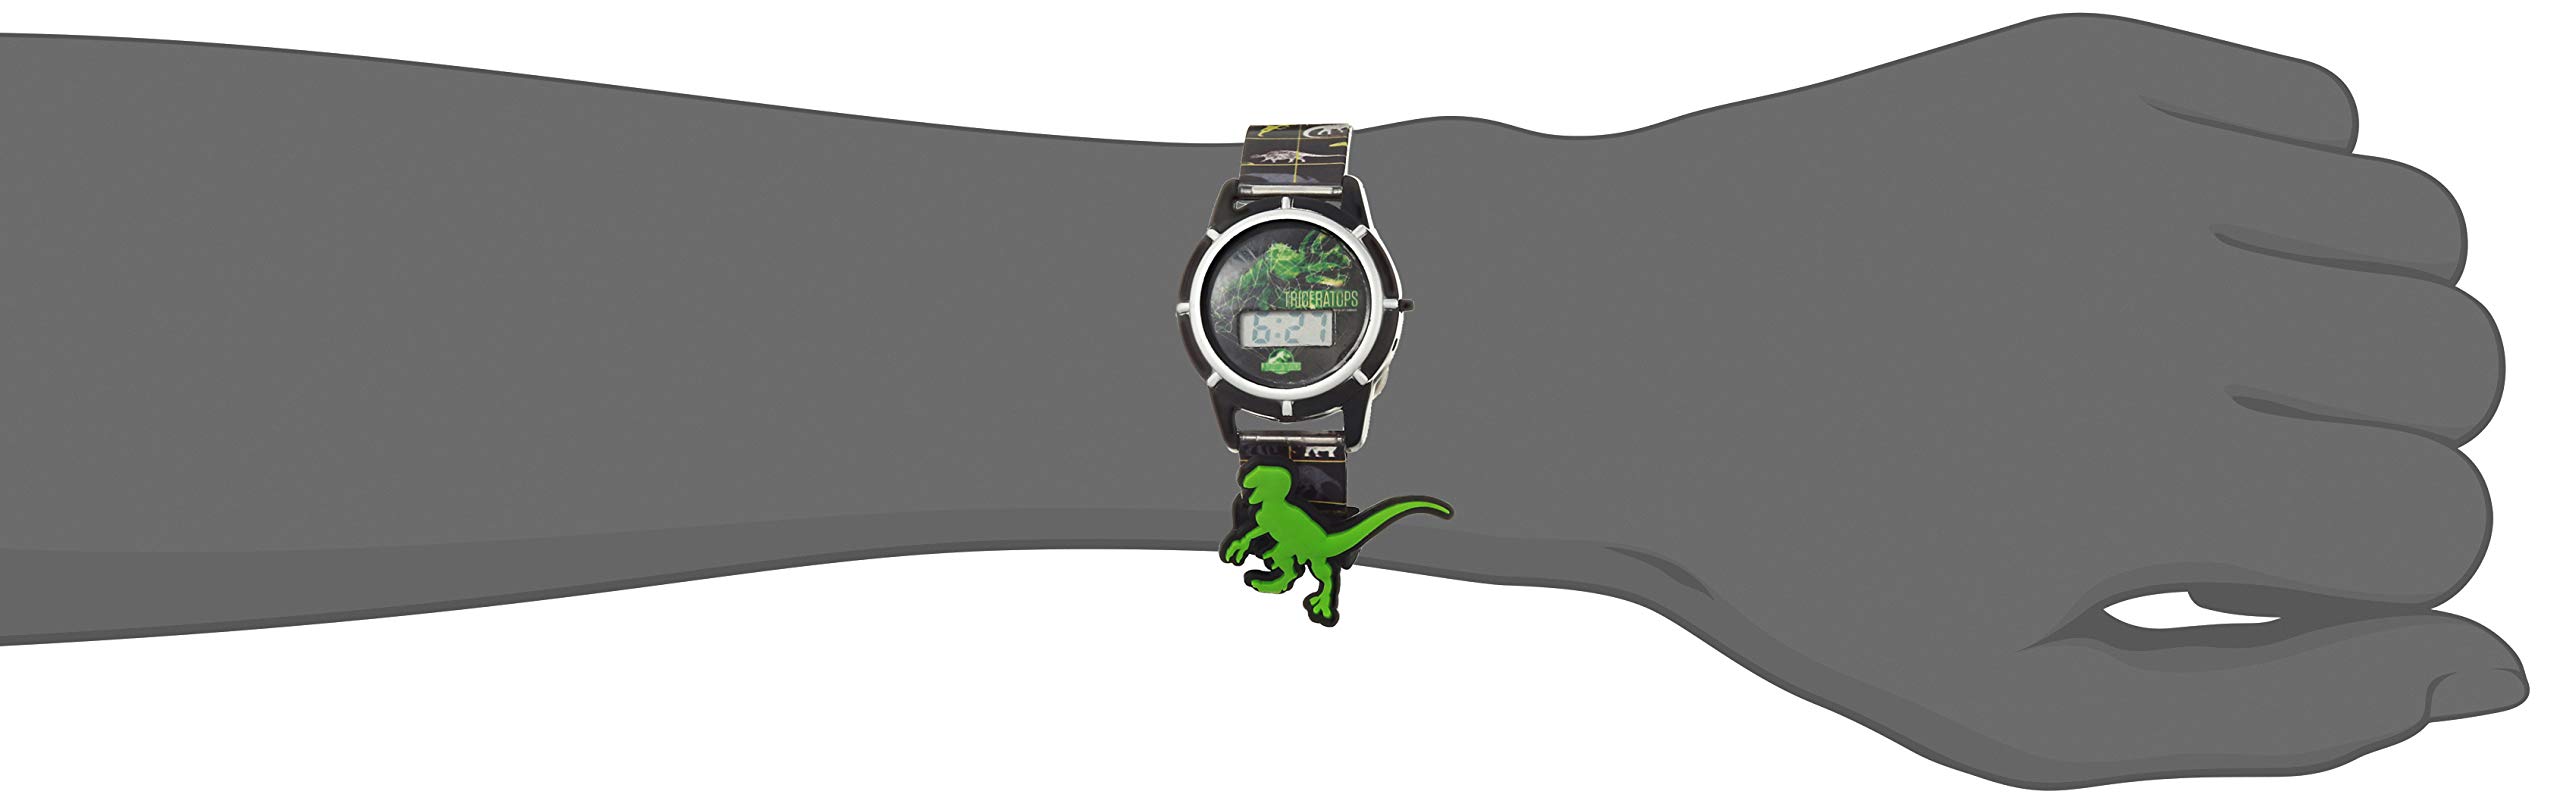 Accutime Jurassic Park World Kids' Digital Watch in Black, with Detailed Removeable Dinosaurs Charms on Rubber Watch Band (Model JRW4015AZ)